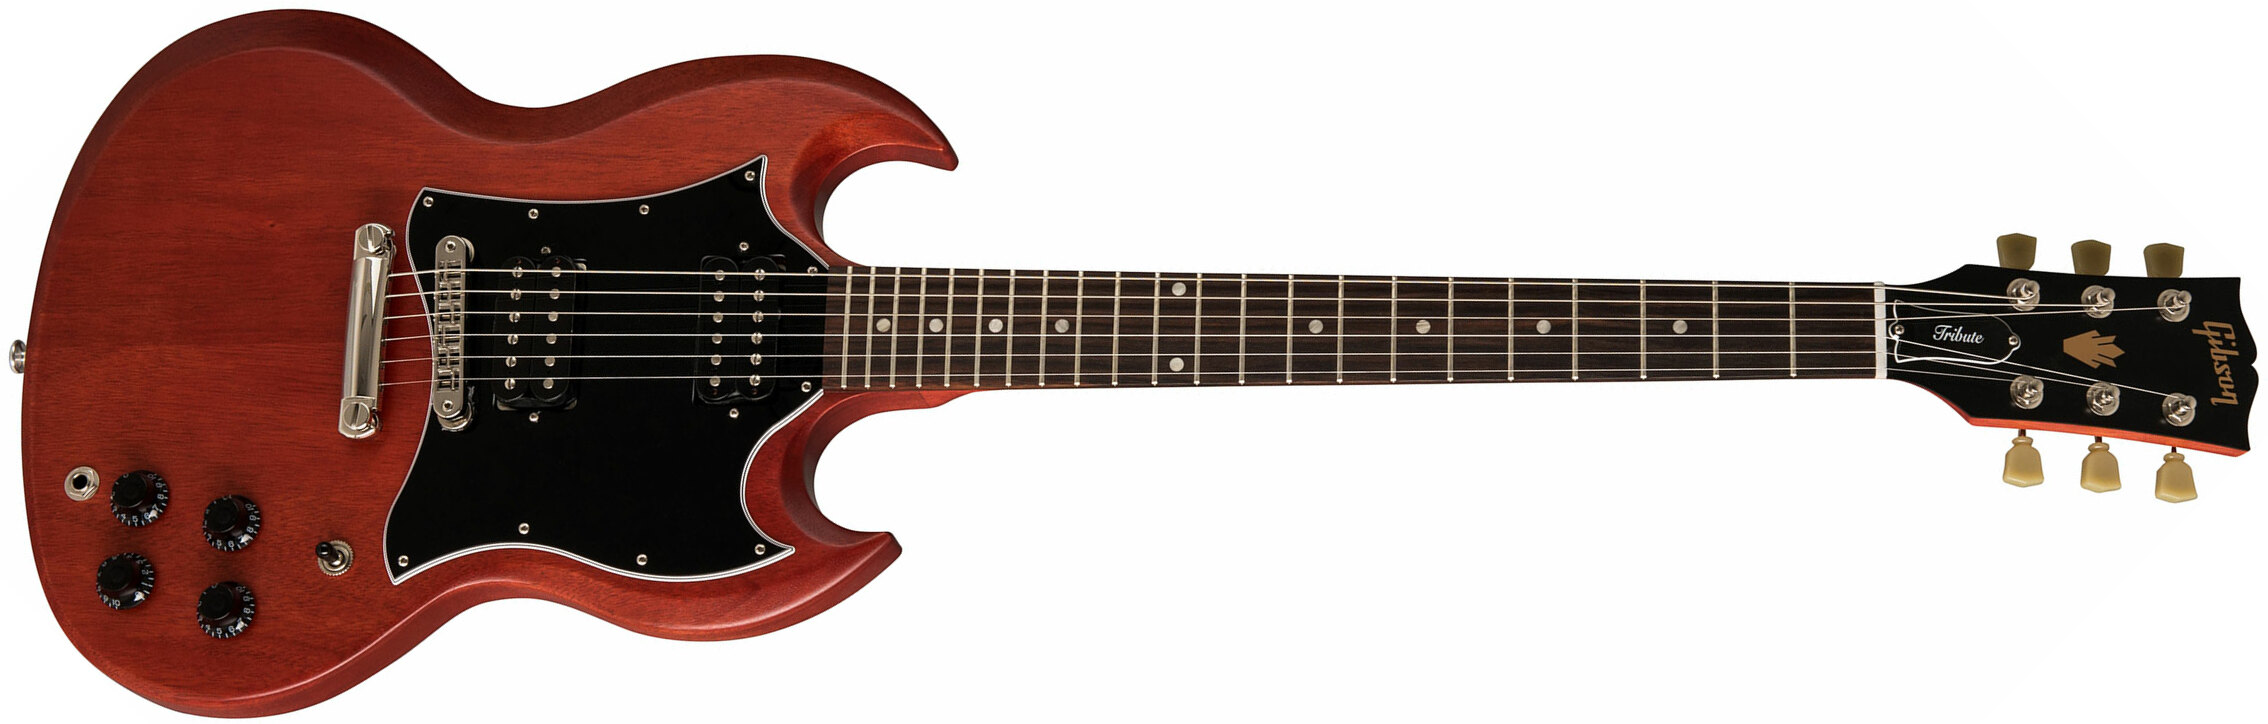 Gibson SG Standard Tribute - vintage cherry satin Double cut